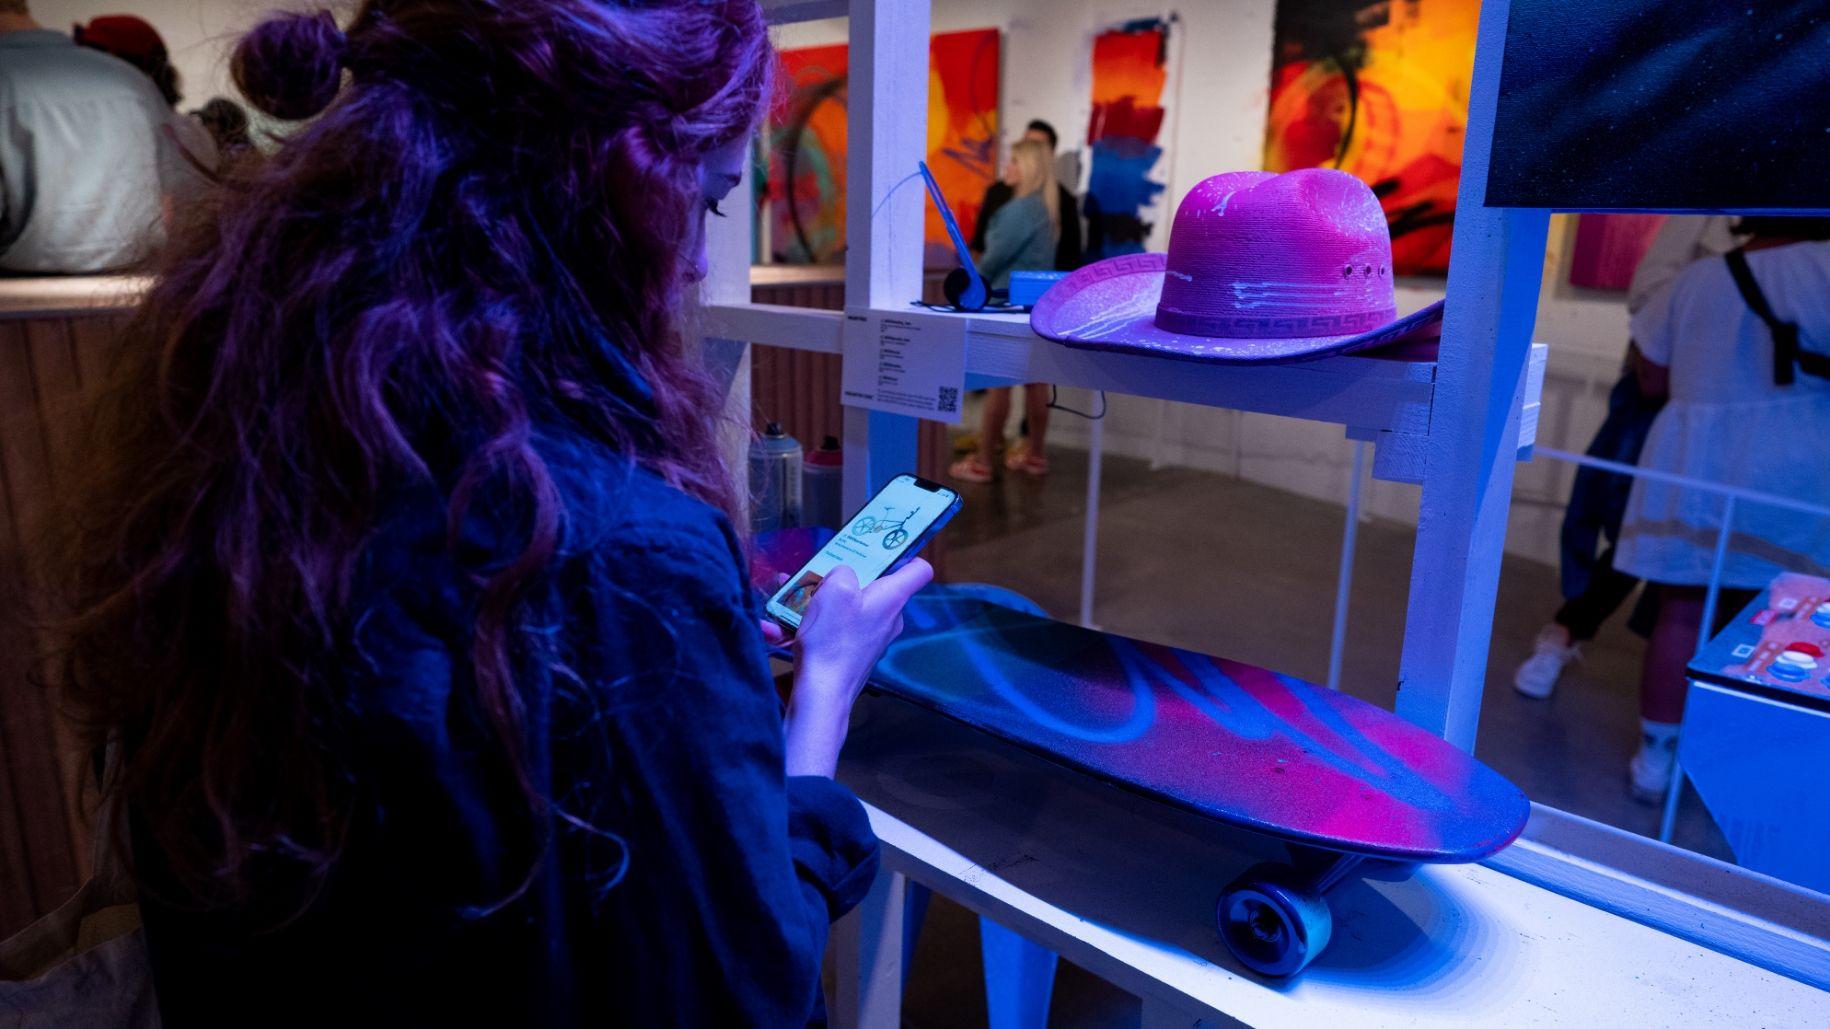 Women looks up artwork prices and info on her phone while in front of spray painted skateboard and spray painted cowboy hat